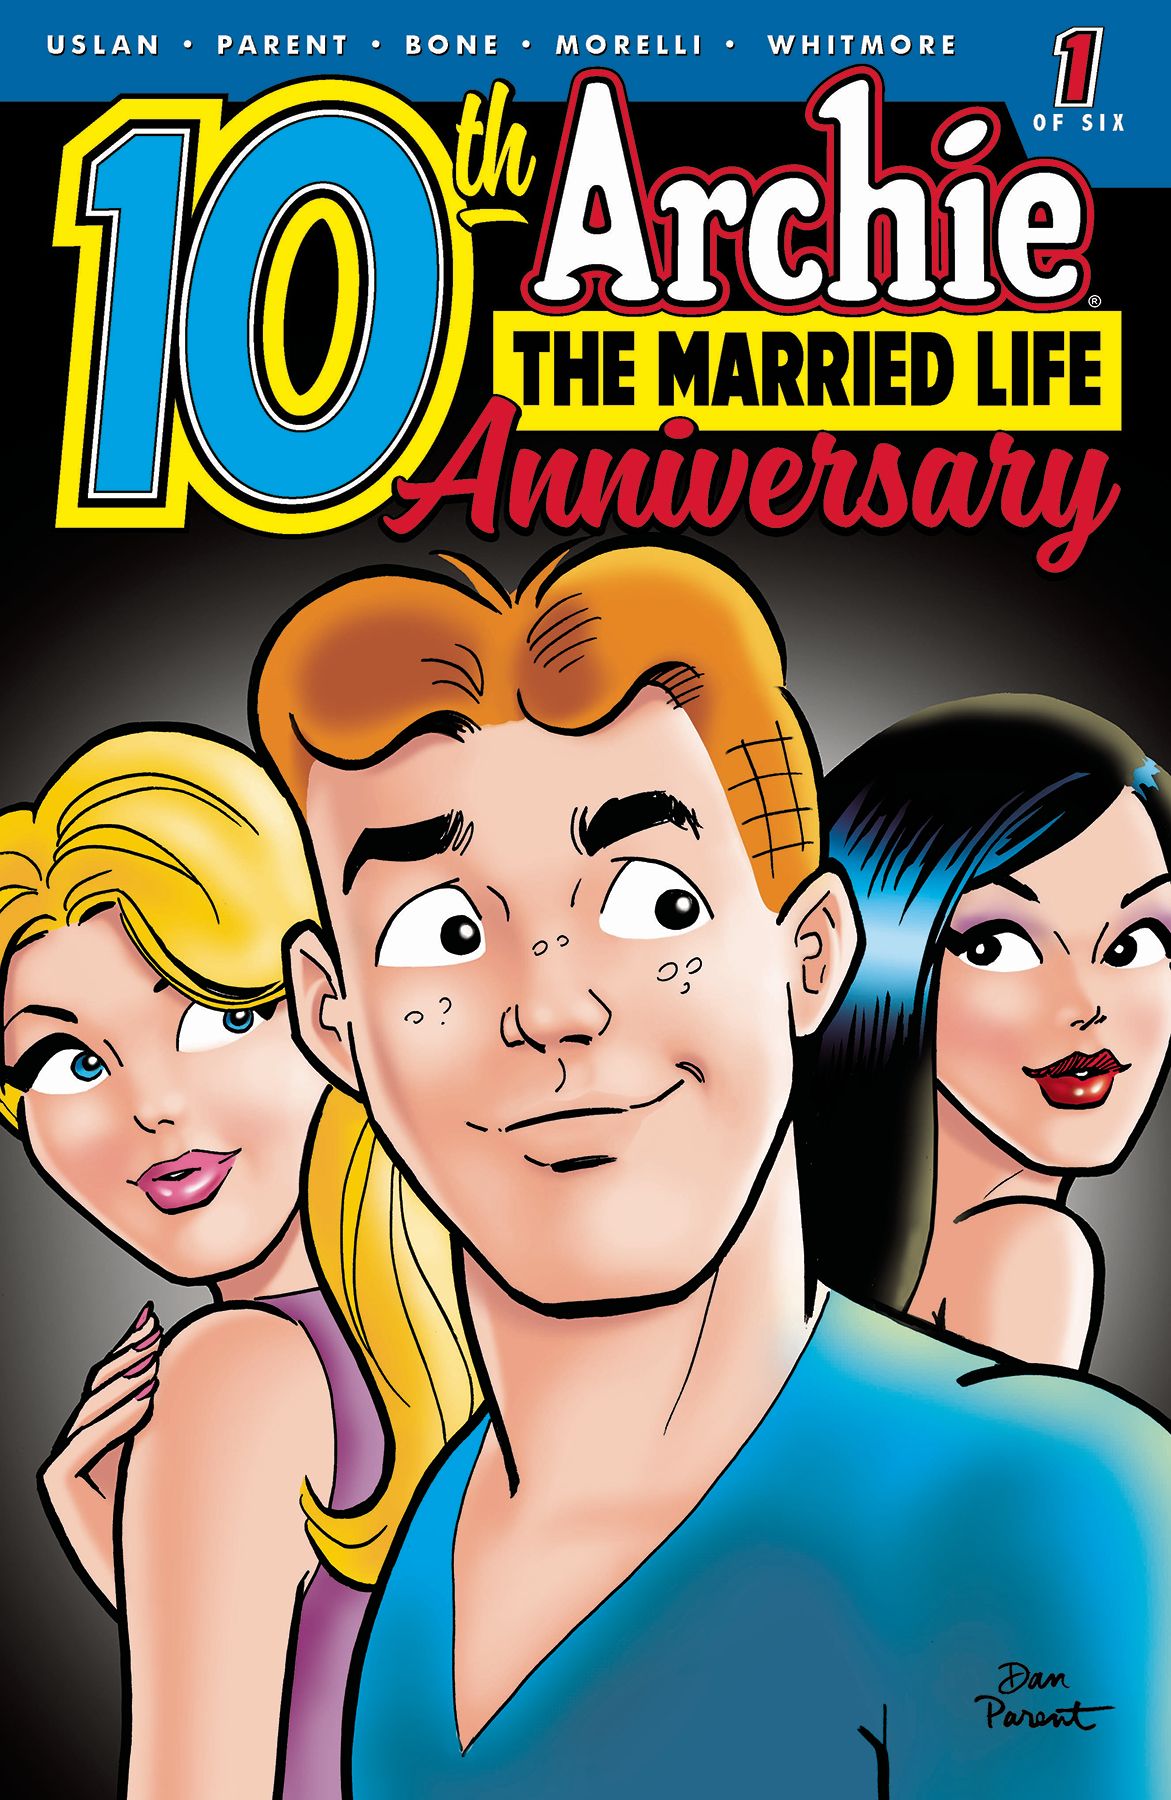 Archie: the Married Life 10th Anniversary  #1 Comic